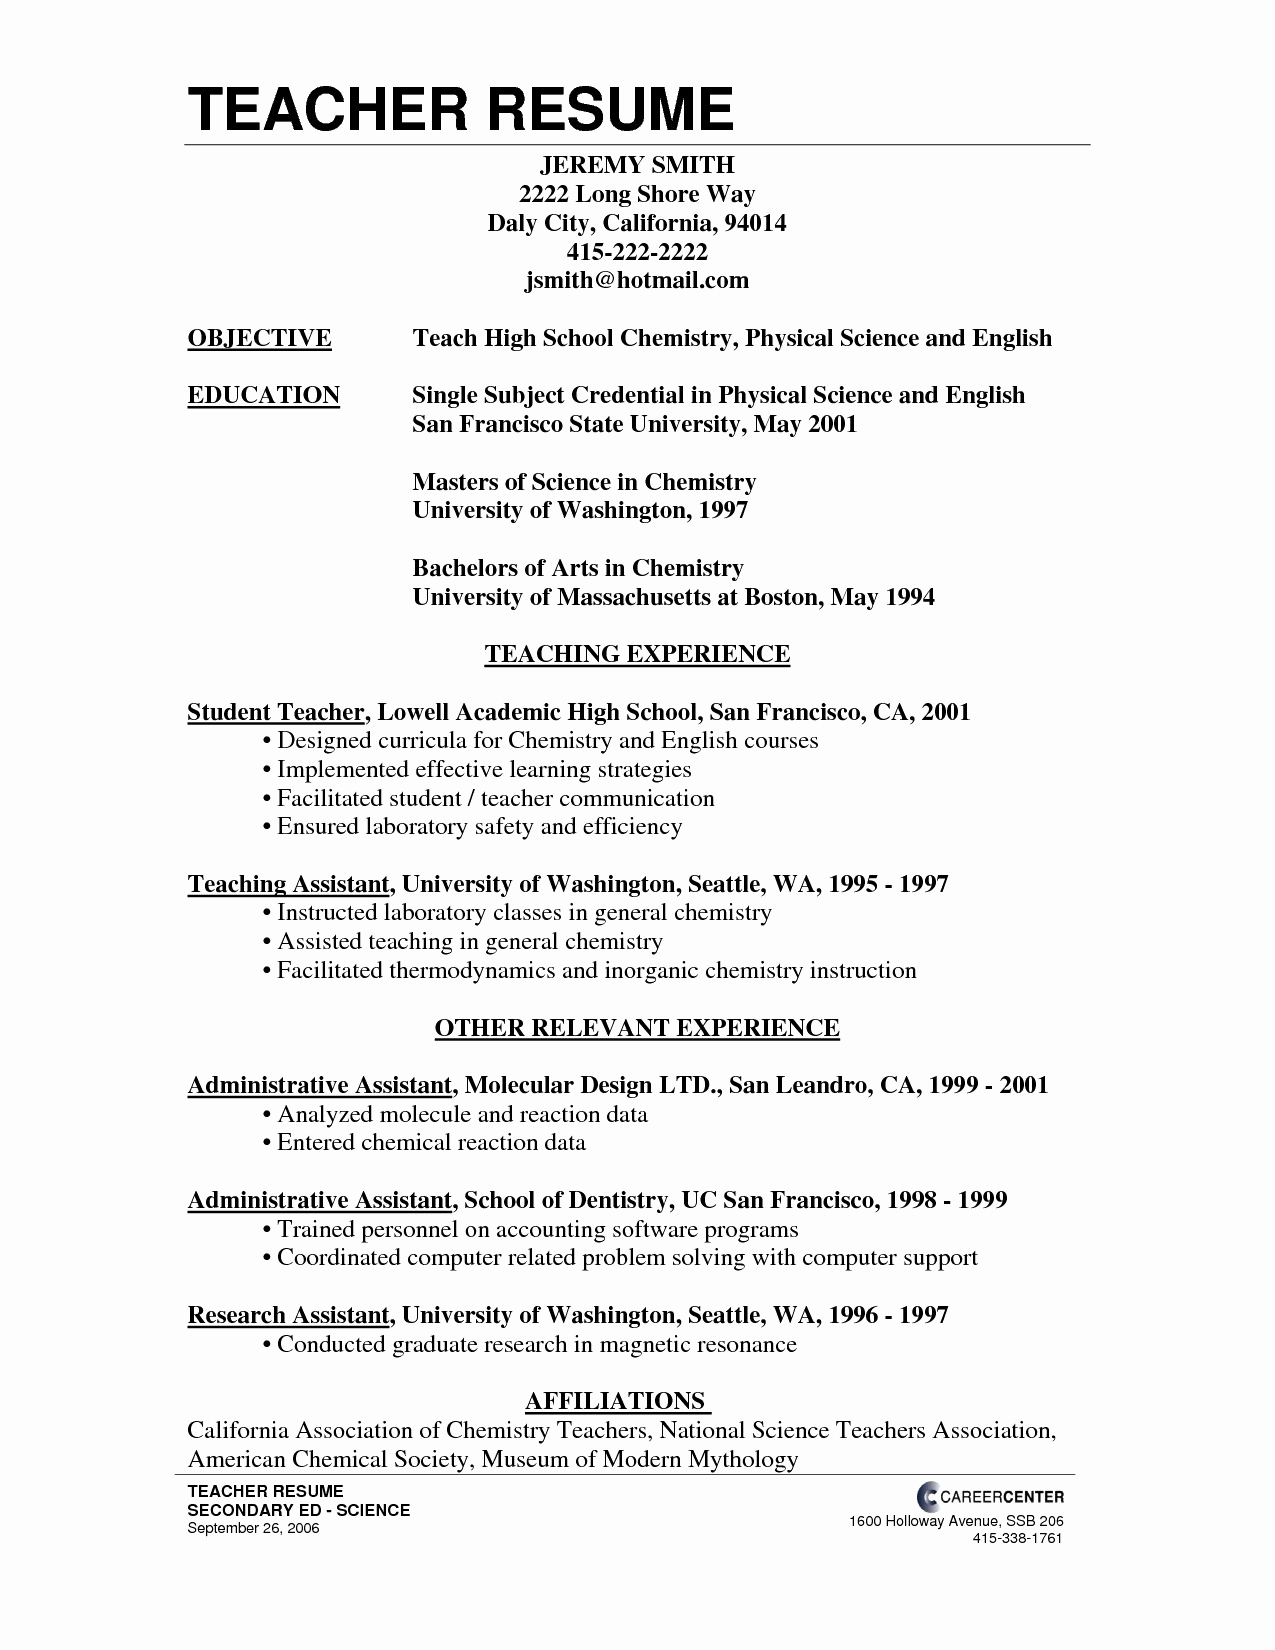 Free Cover Letter Template Microsoft Word - Resume Templates Word Free New Free Cover Letter Templates Examples